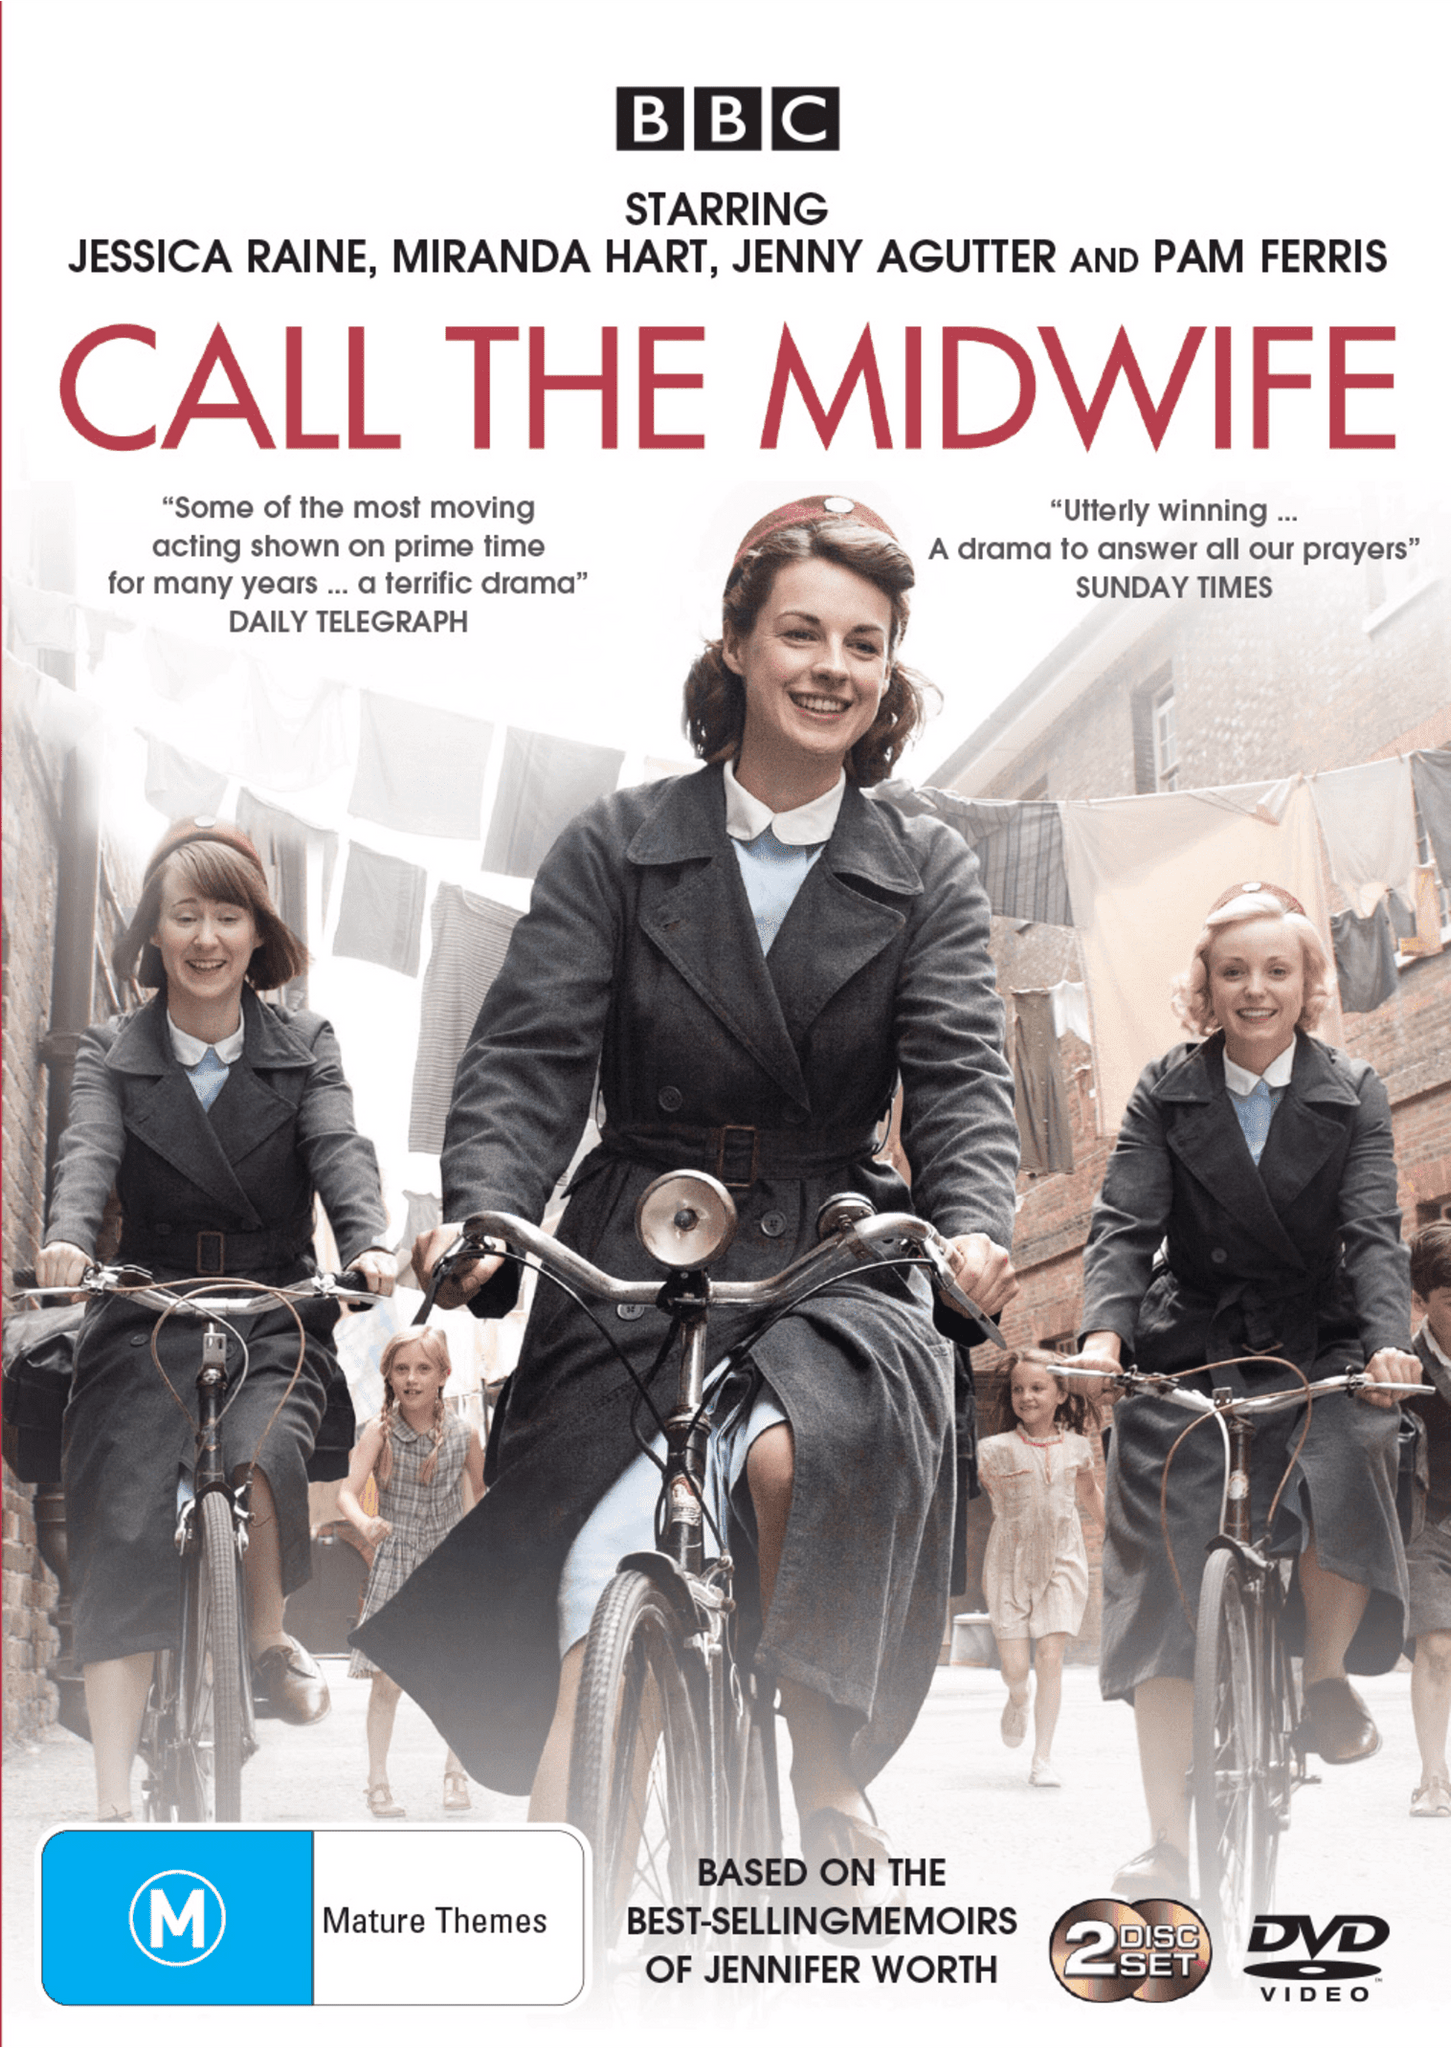 CALL THE MIDWIFE: SERIES 1